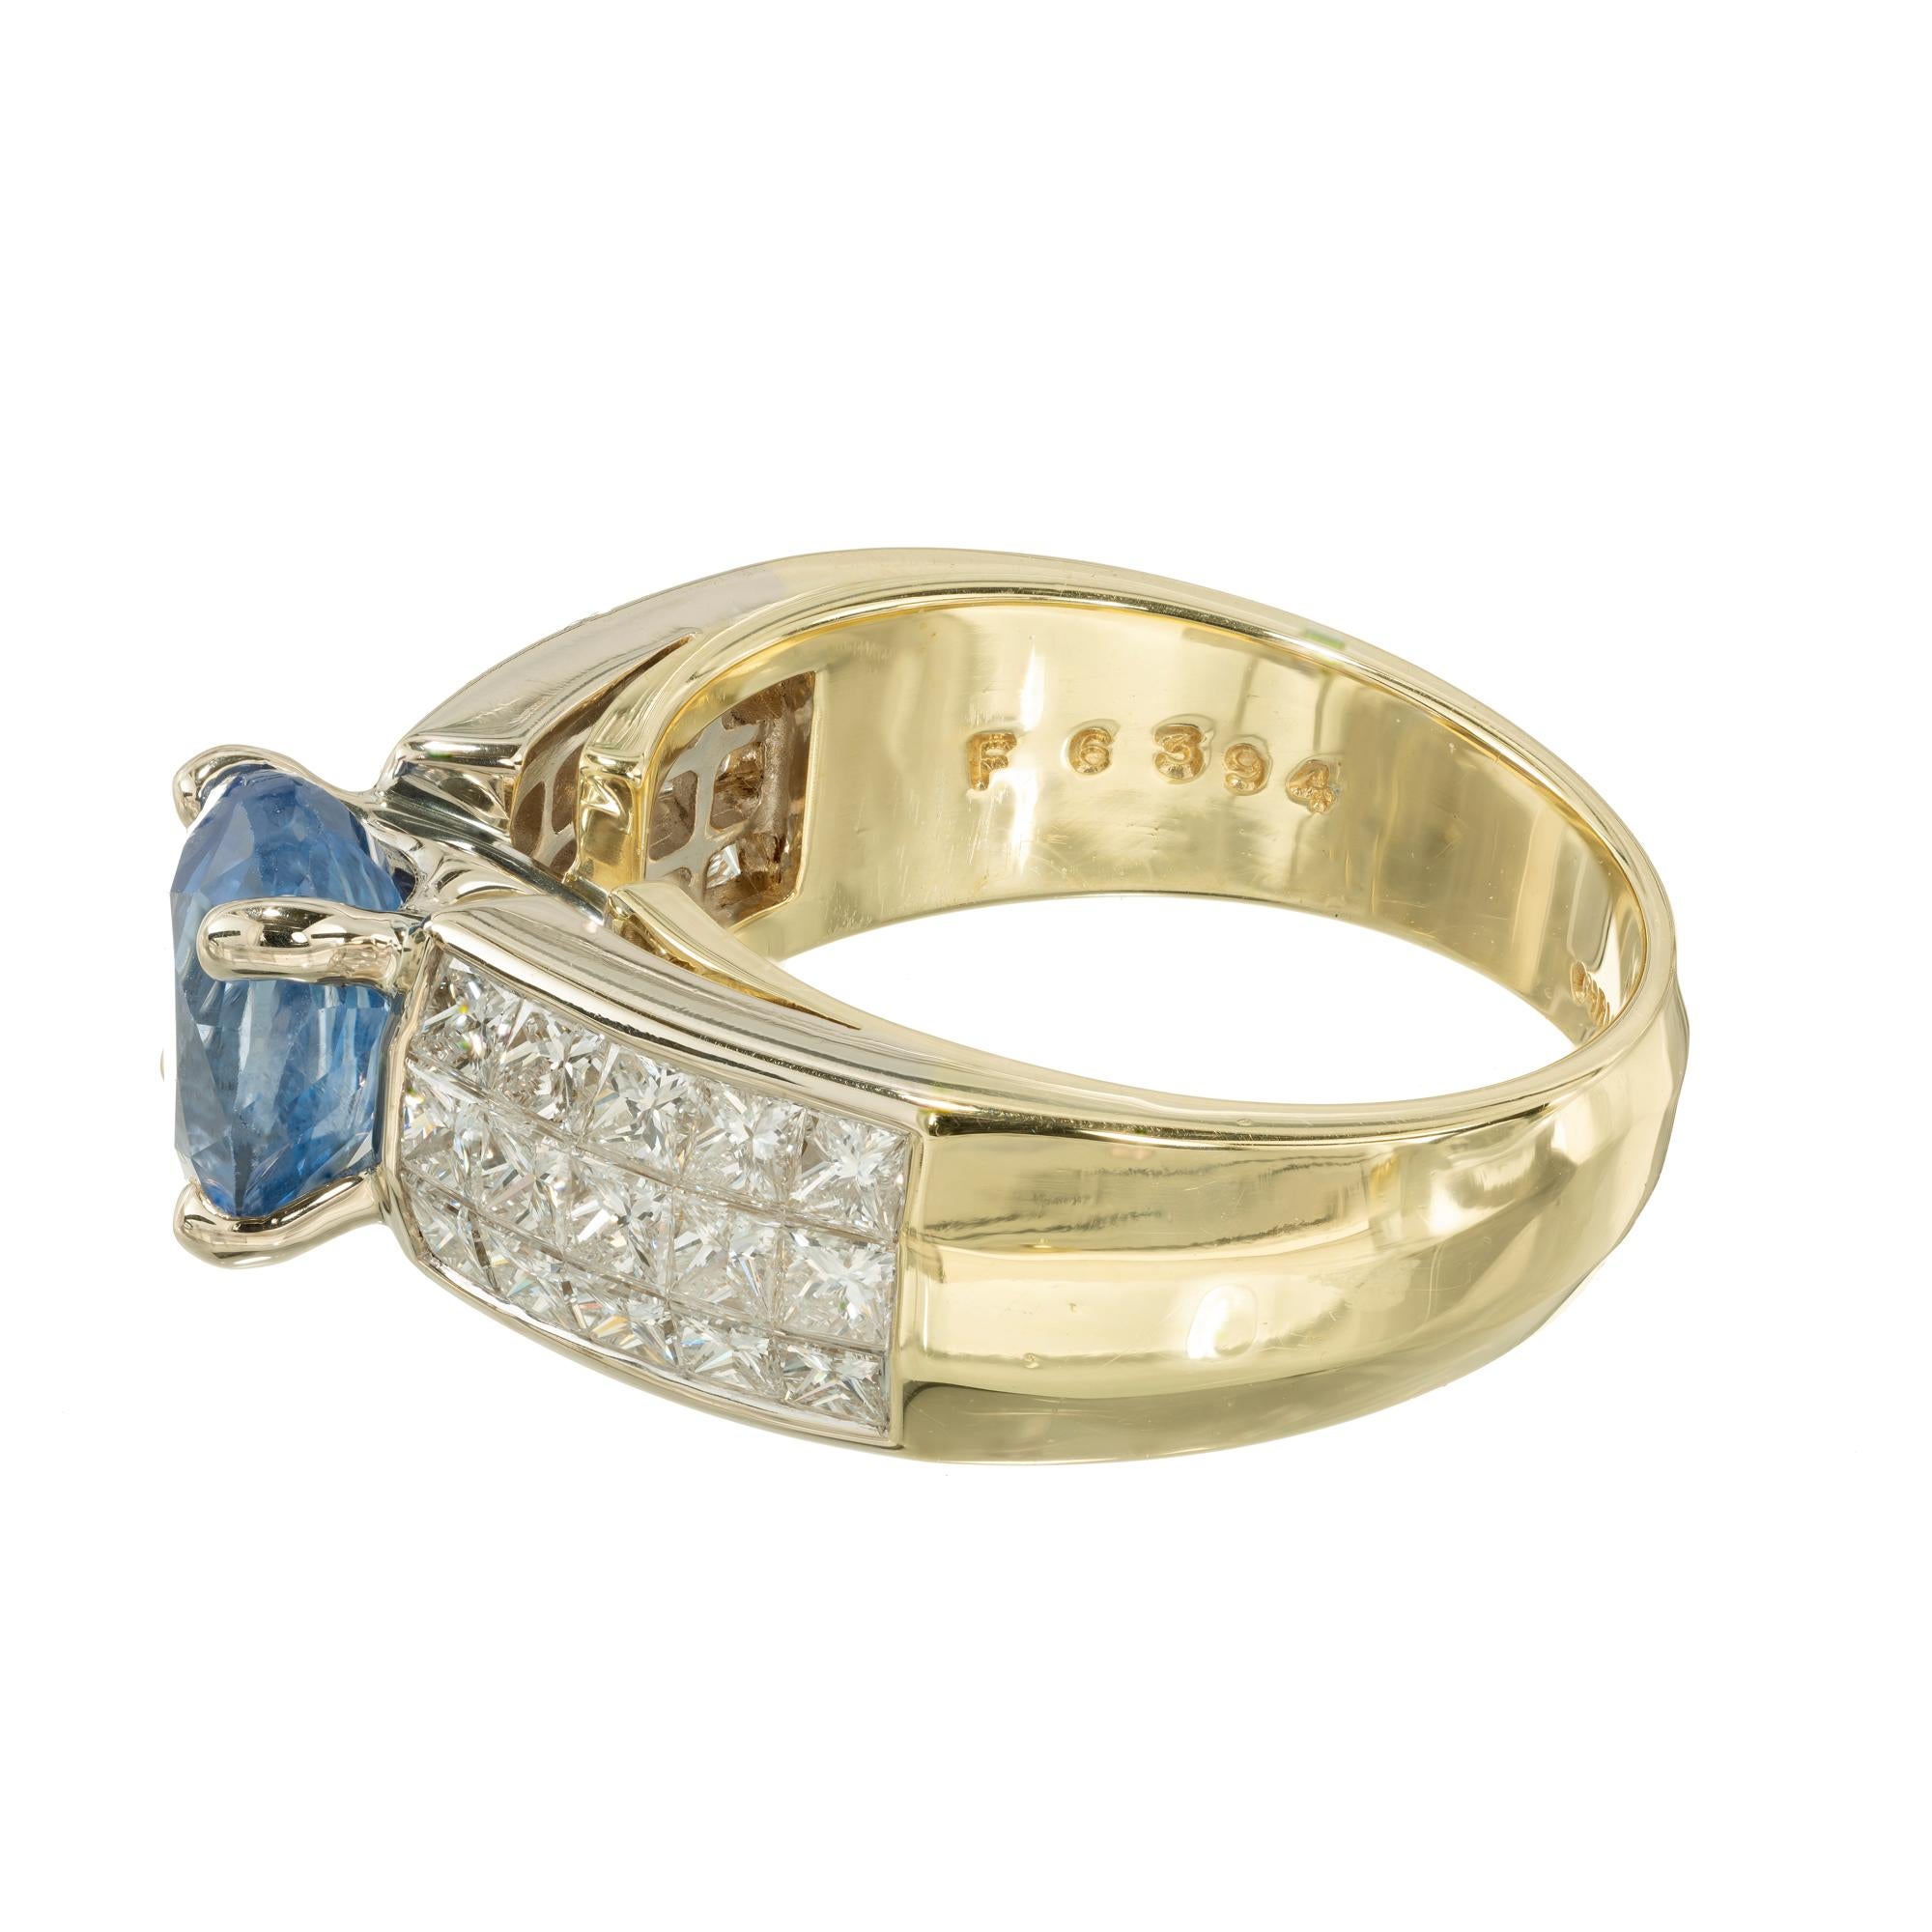 Christopher Designs GIA Certified 2.38 Carat Sapphire Diamond Gold Ring In Excellent Condition For Sale In Stamford, CT